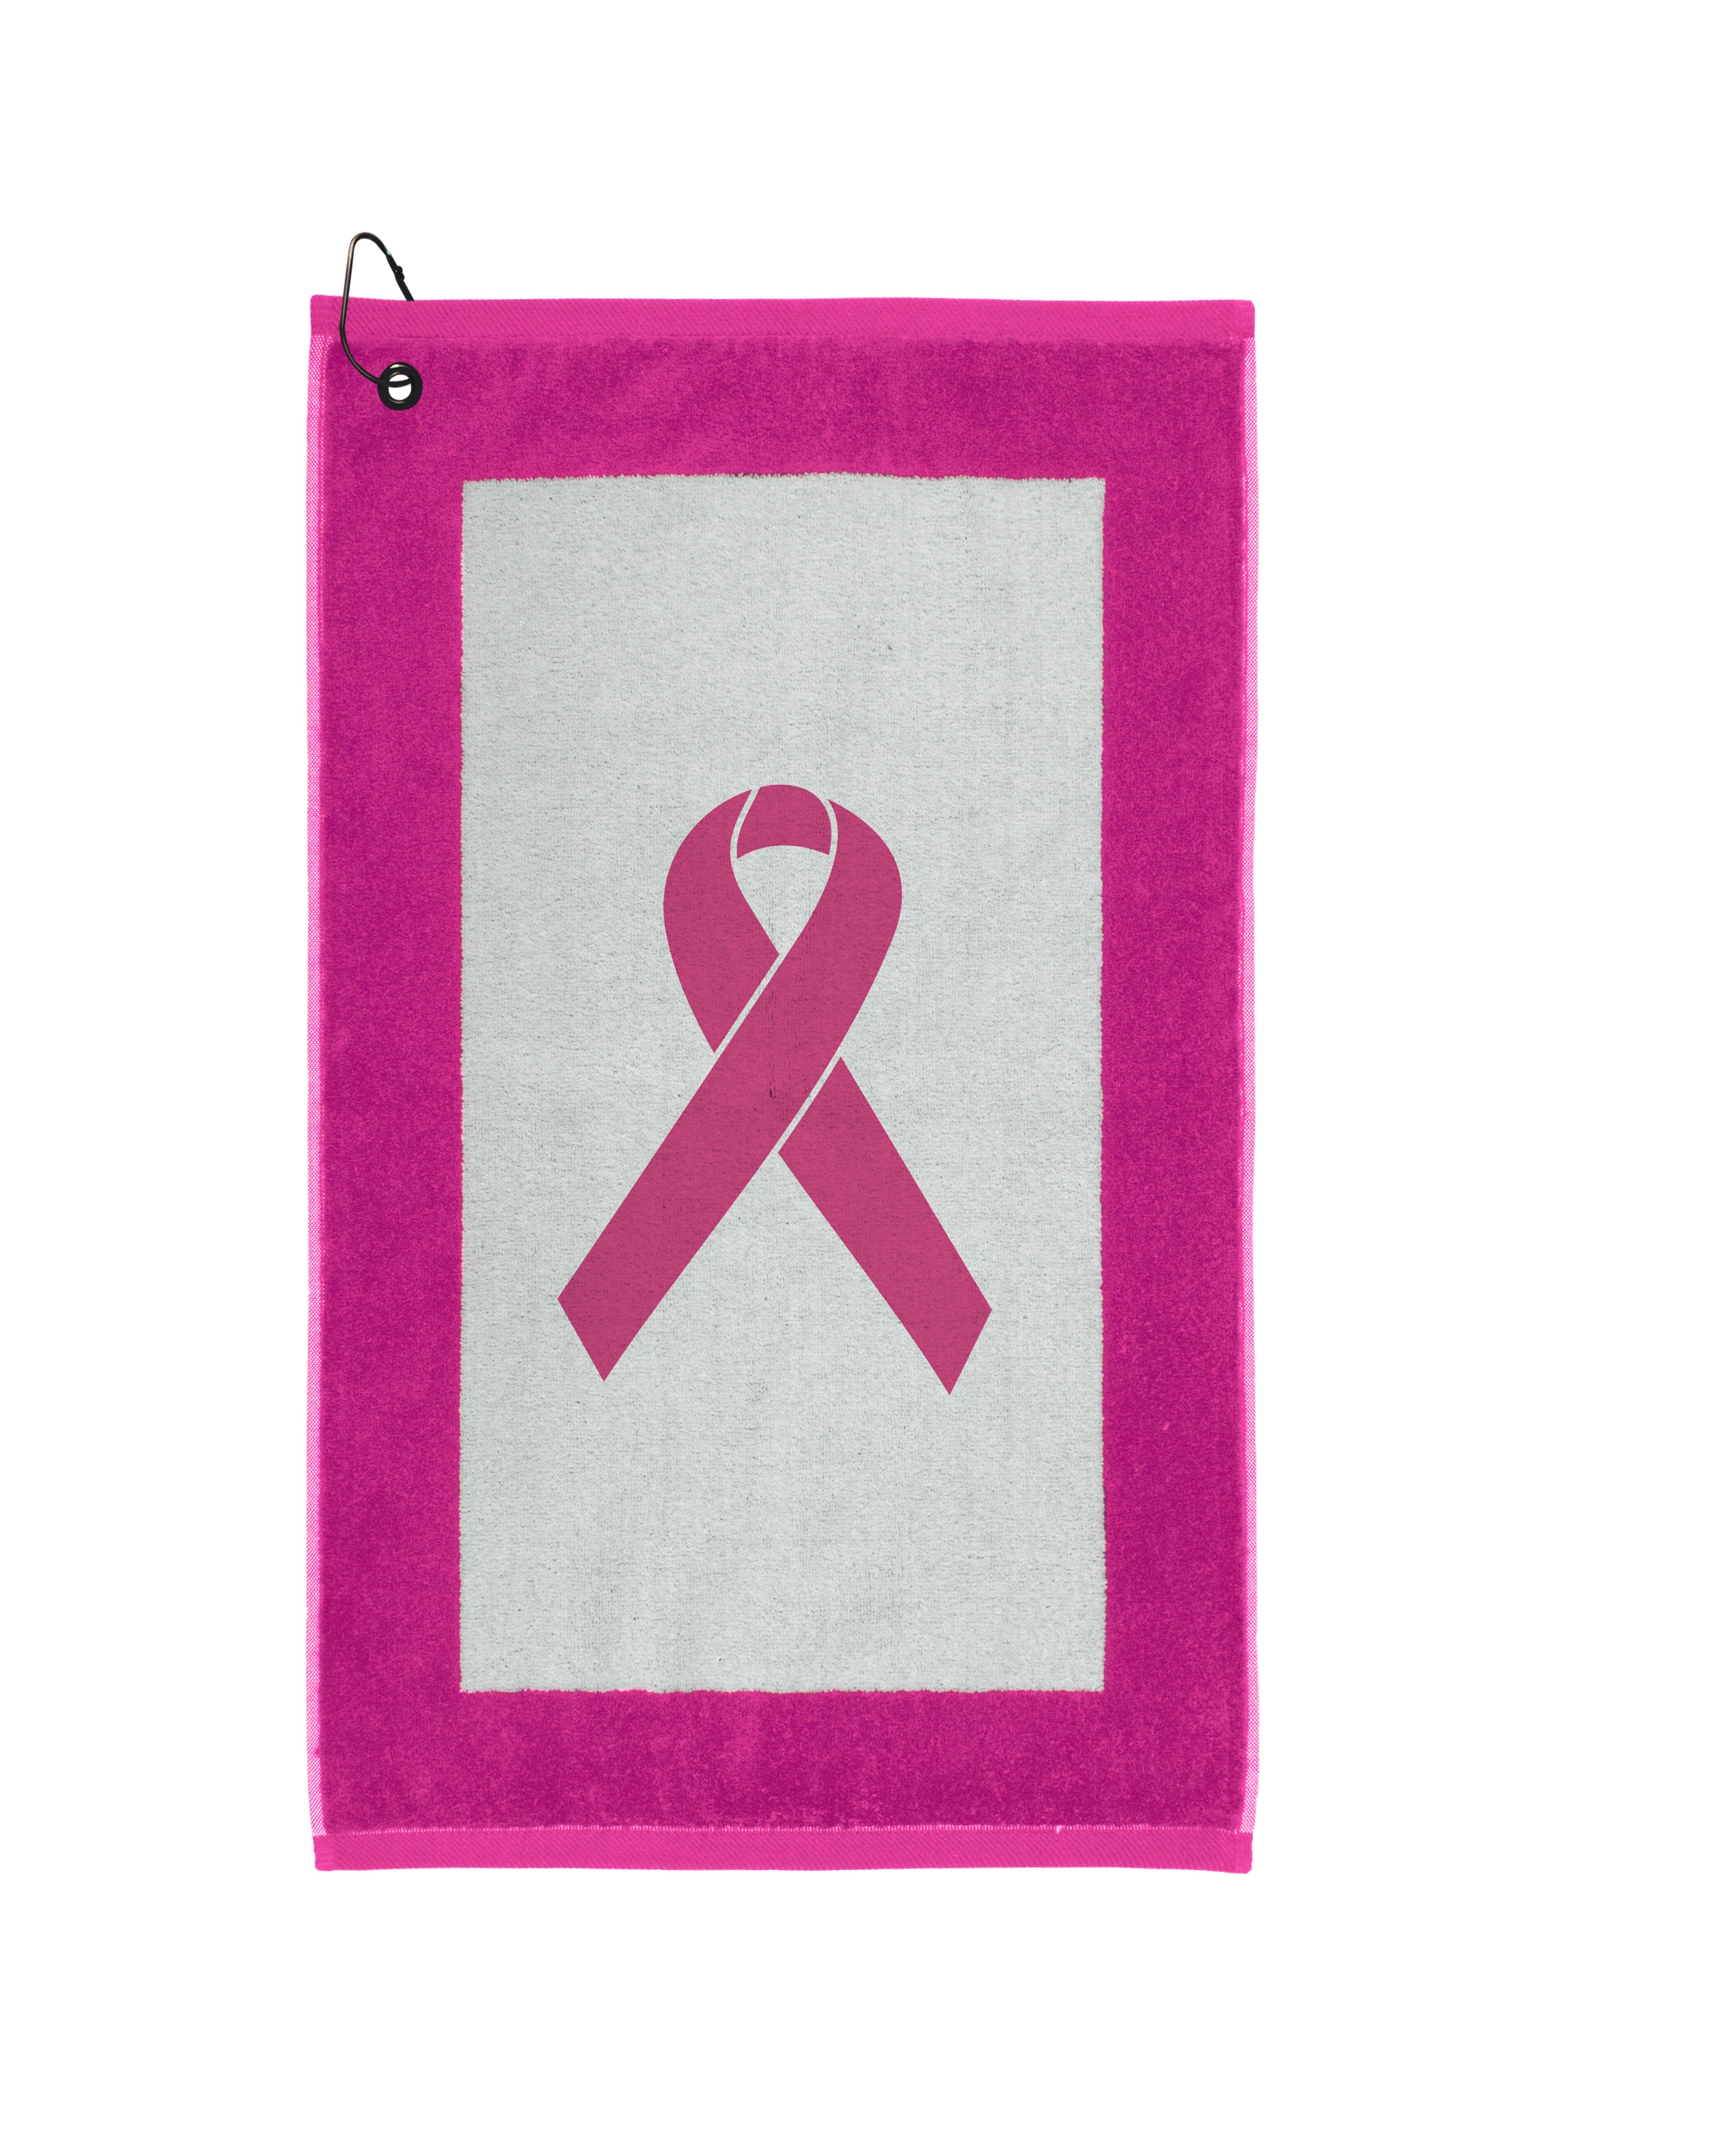 Devant Sport Towels Showcases Pink Ribbon Towel Collection Ahead of Breast Cancer Awareness Month